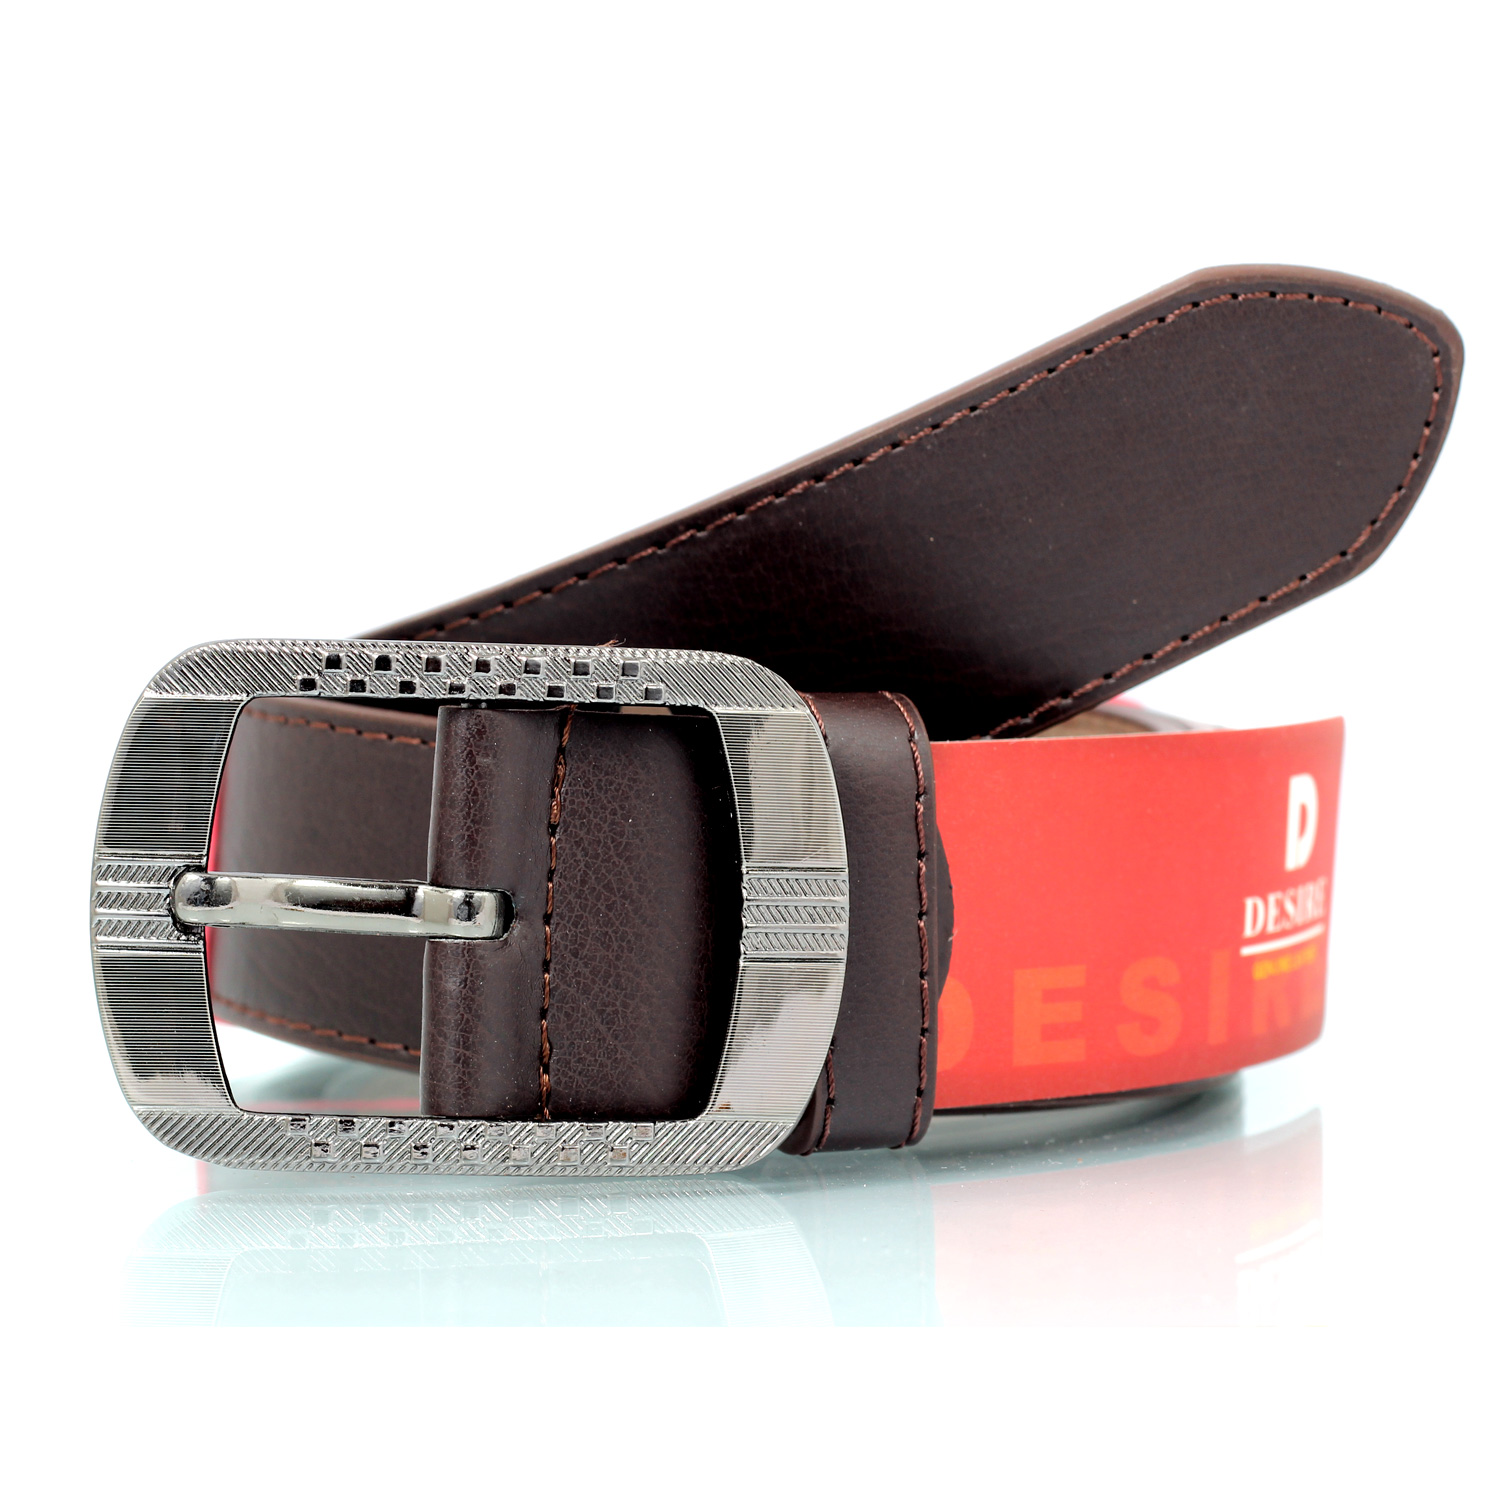 Brown formal genuine leather belt with paradigms buckle